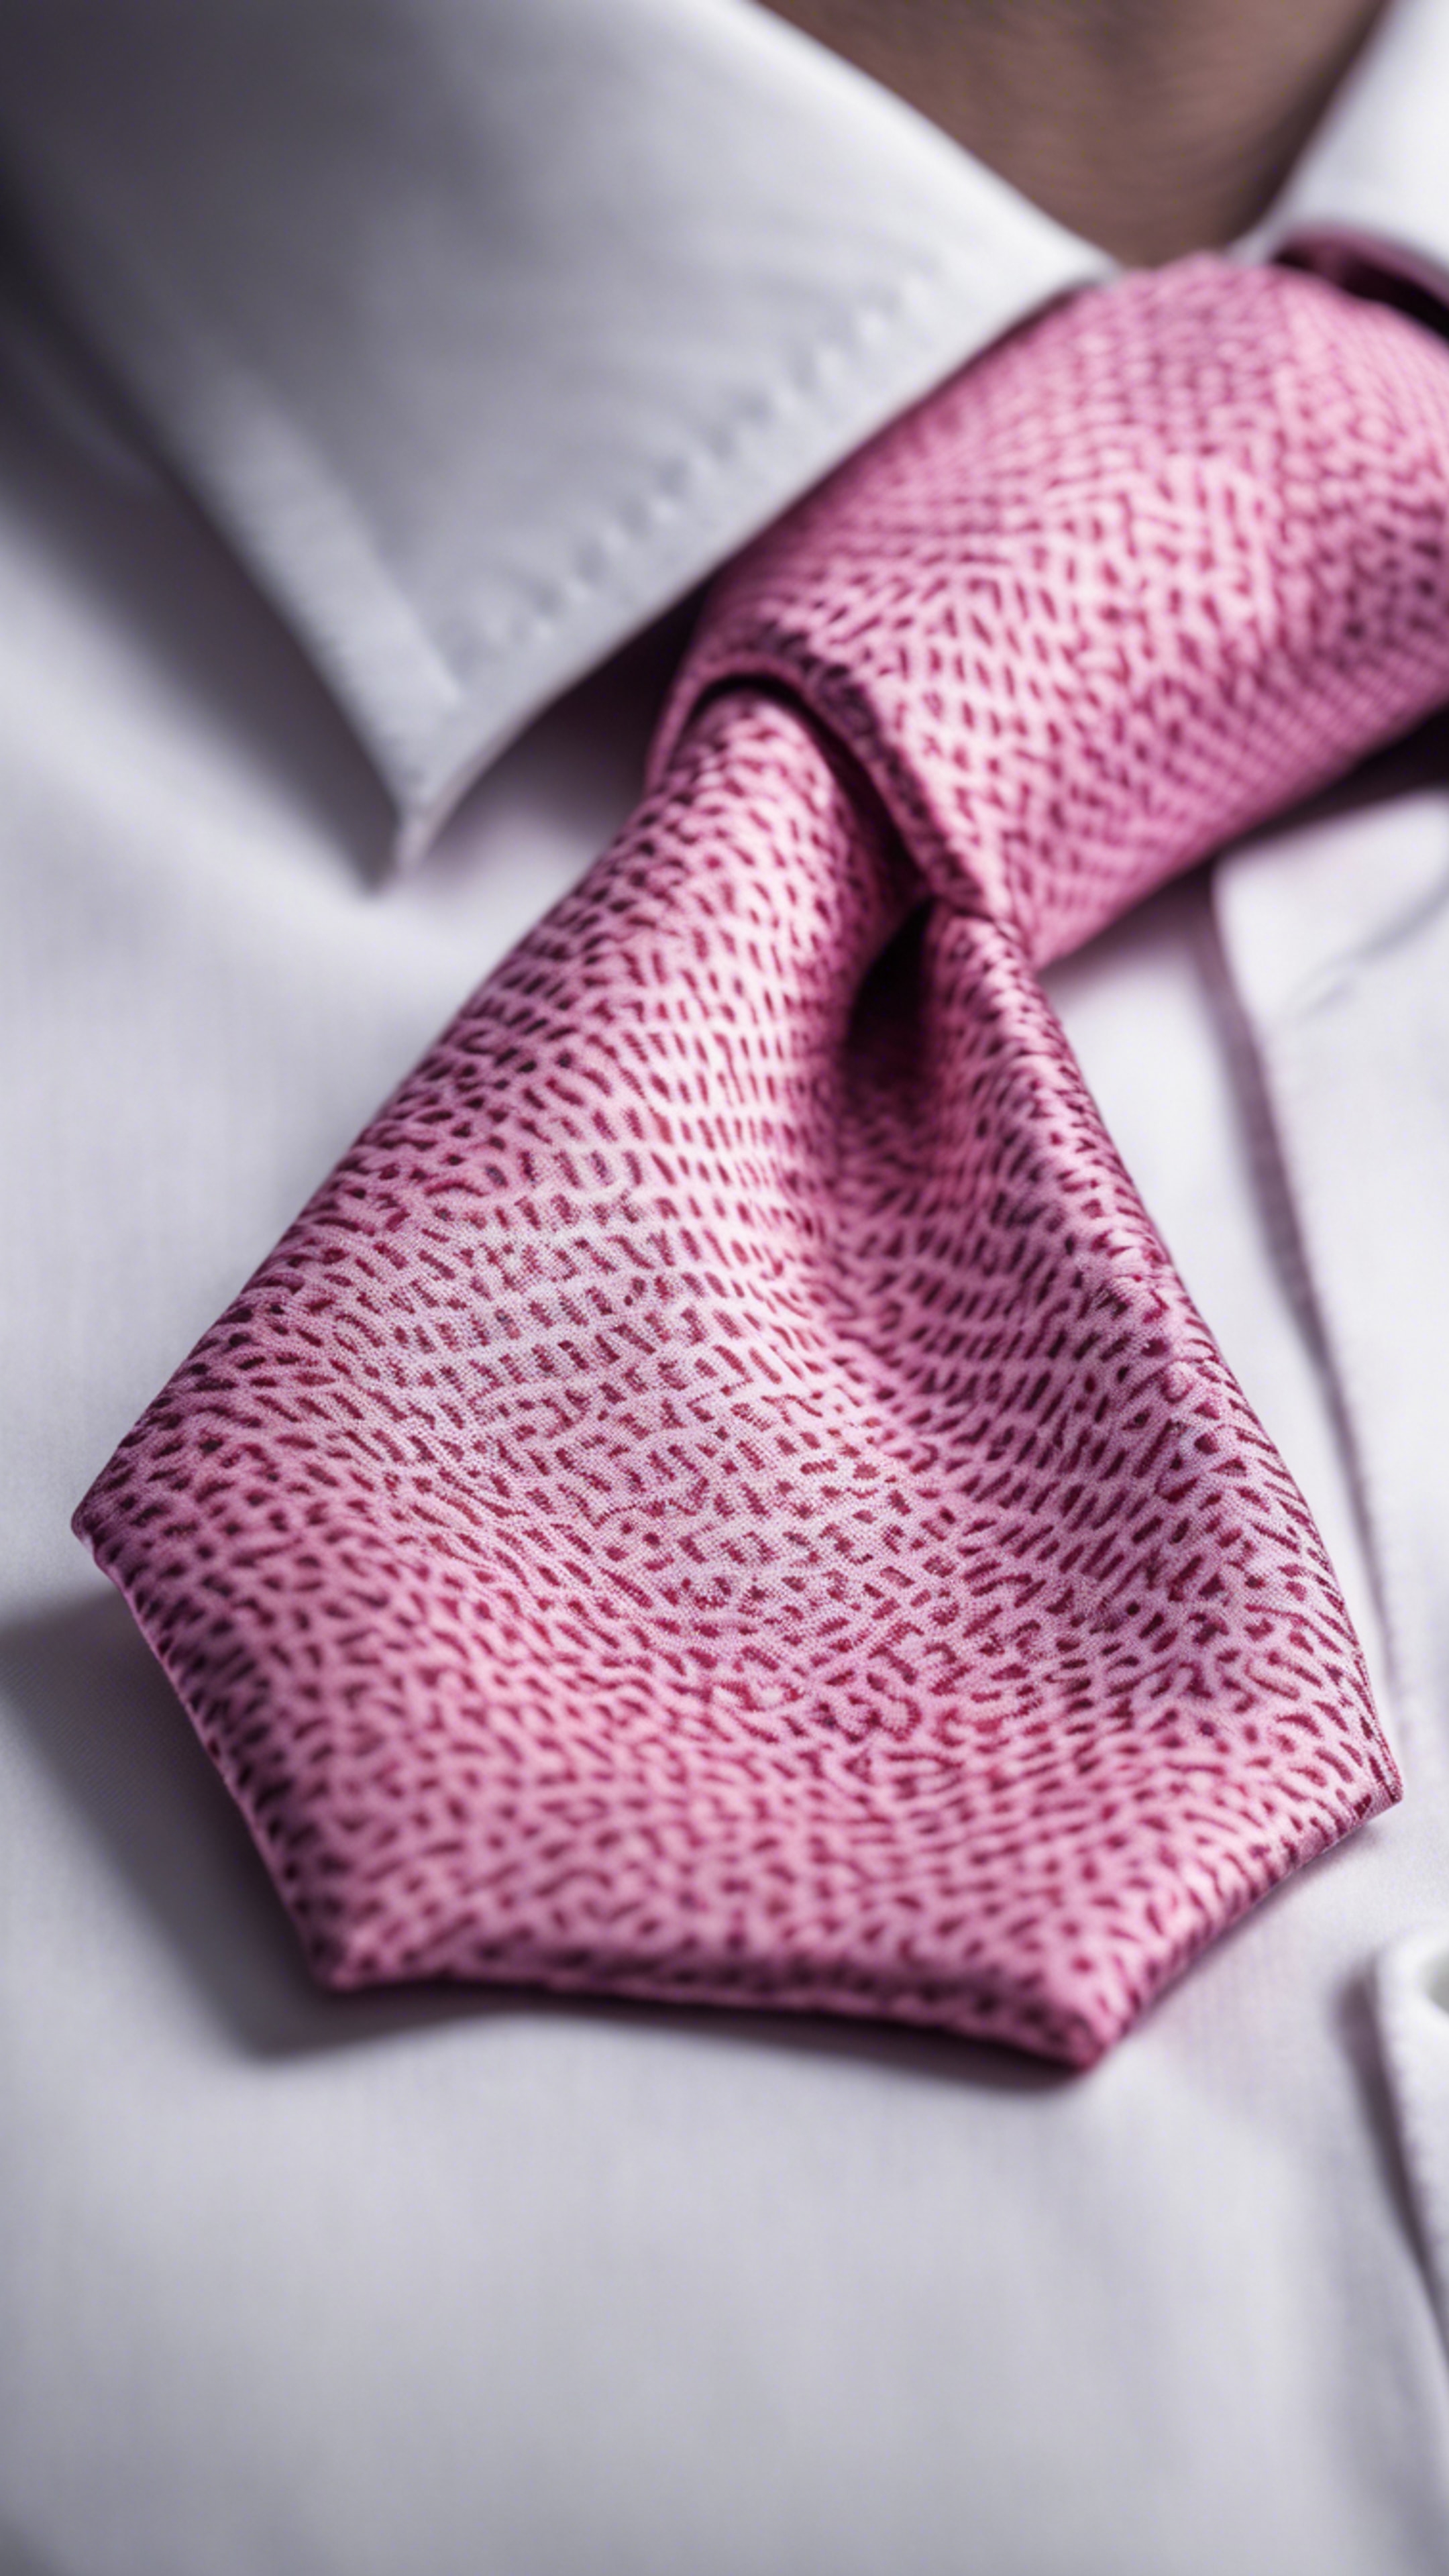 A pink patterned silk tie atop a clean, starched white shirt, representing preppy fashion. Hintergrund[46ce982d17ca4b87a426]